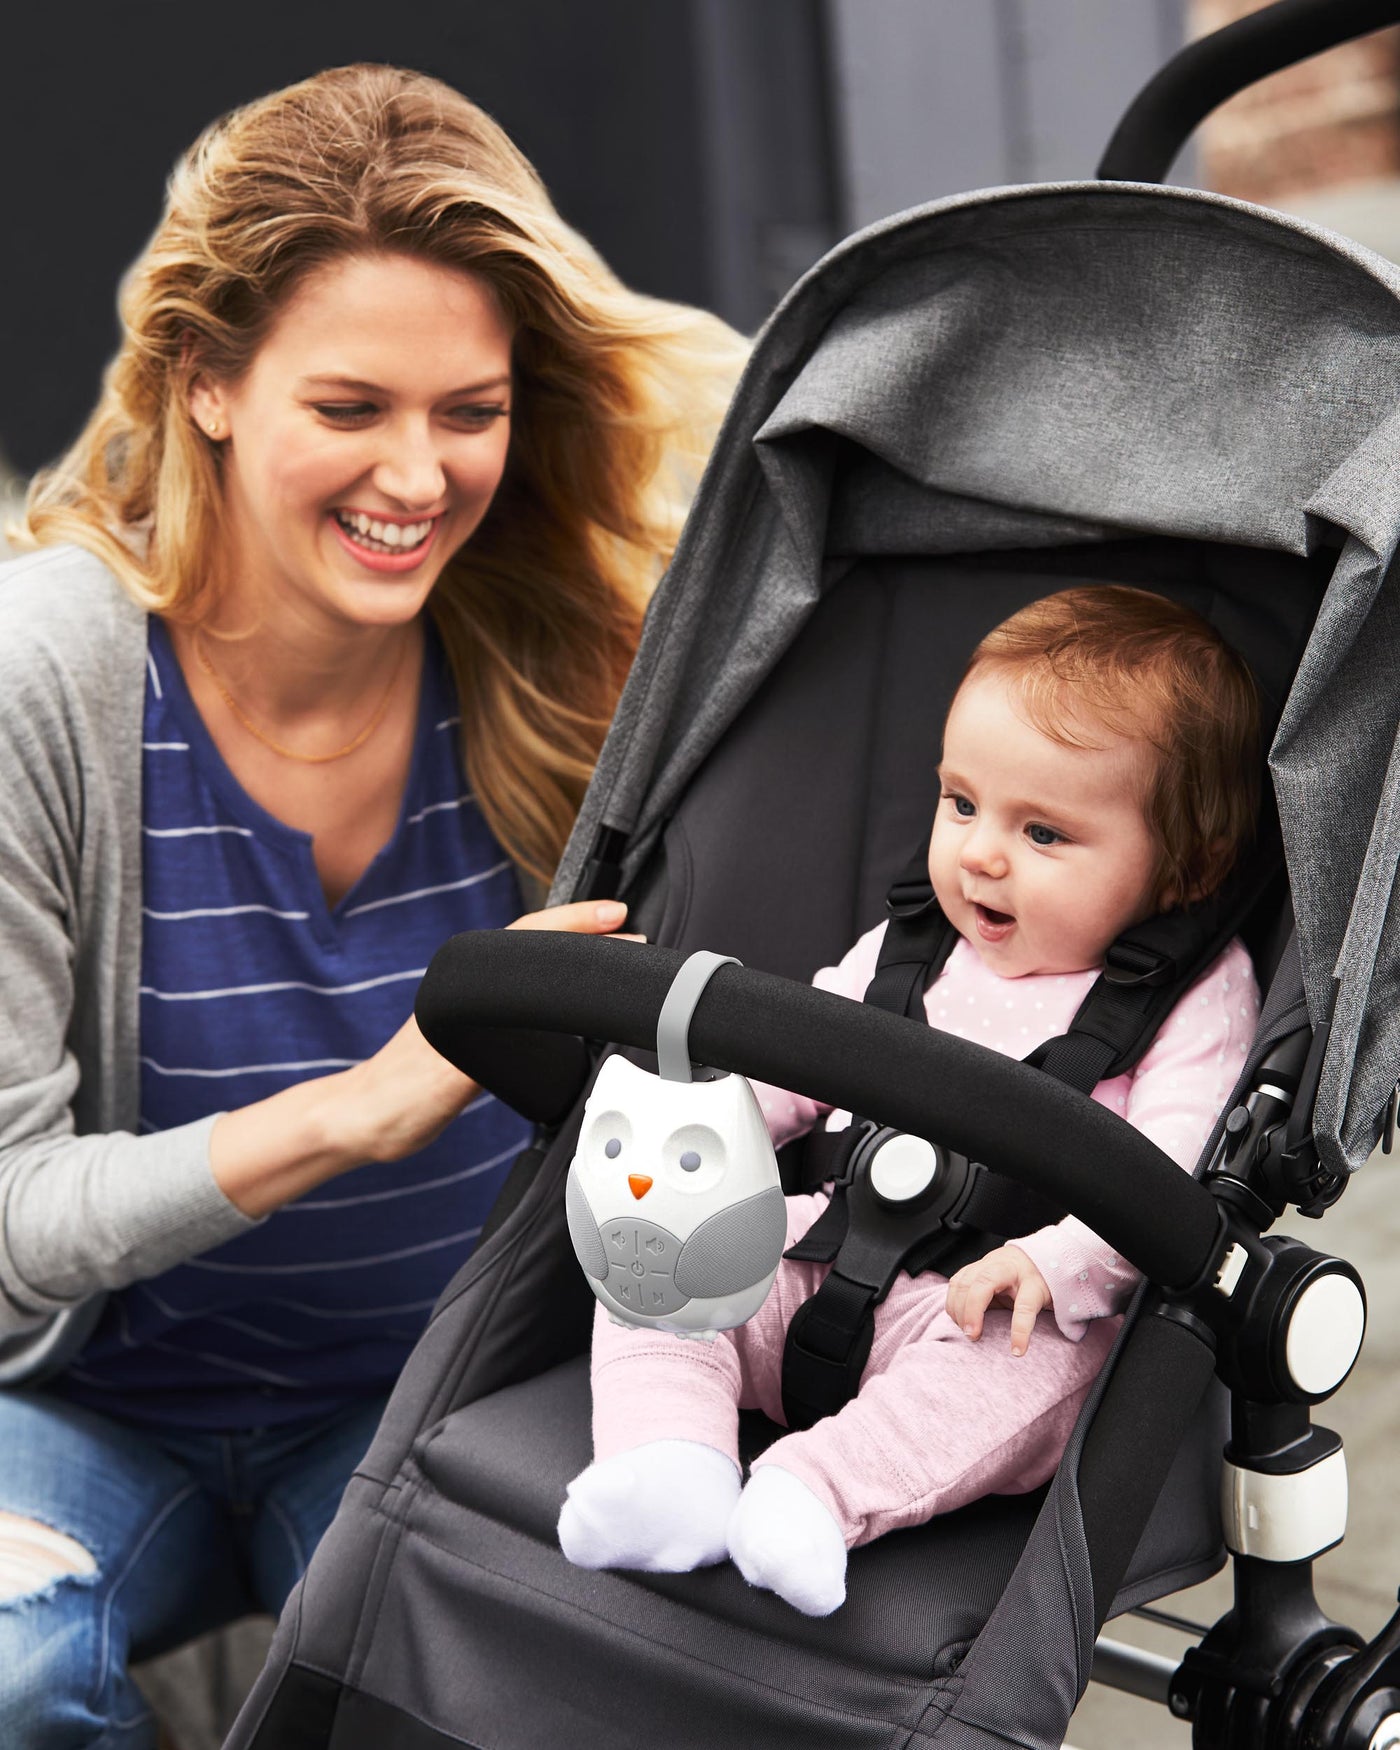 Stroll & Go Portable Baby Soother | Skip Hop